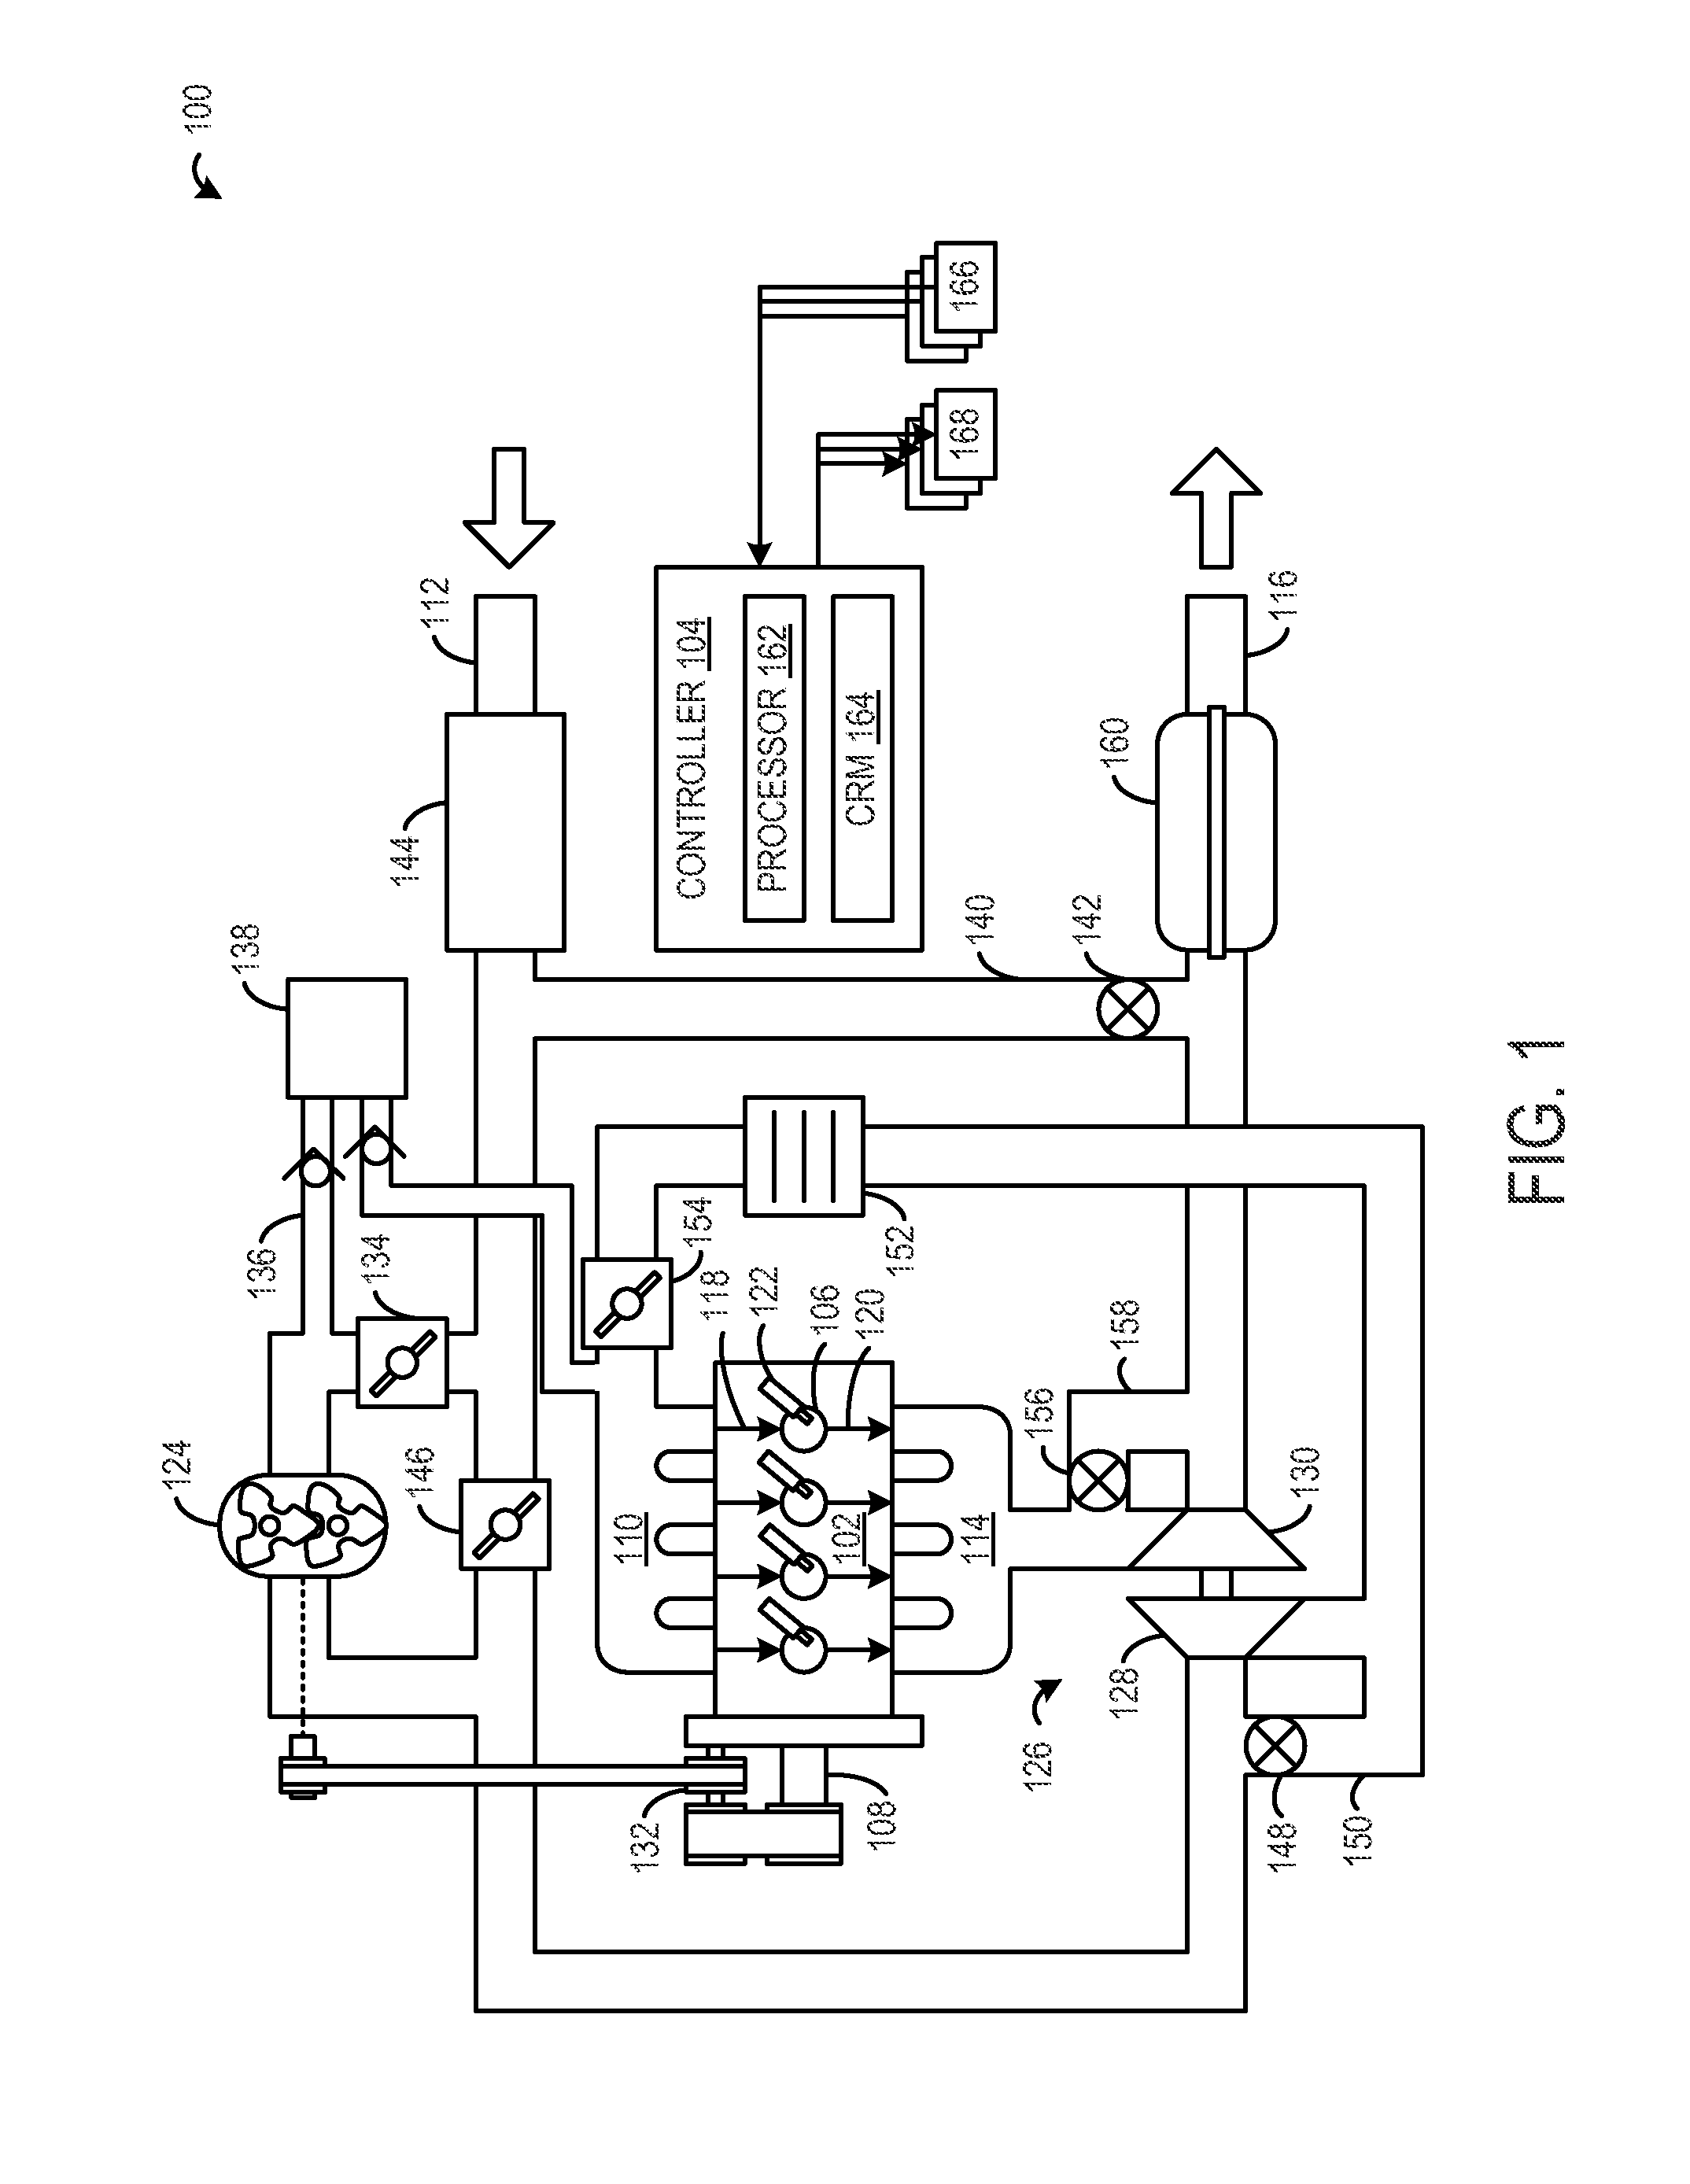 Approach for supplying vacuum via a supercharger